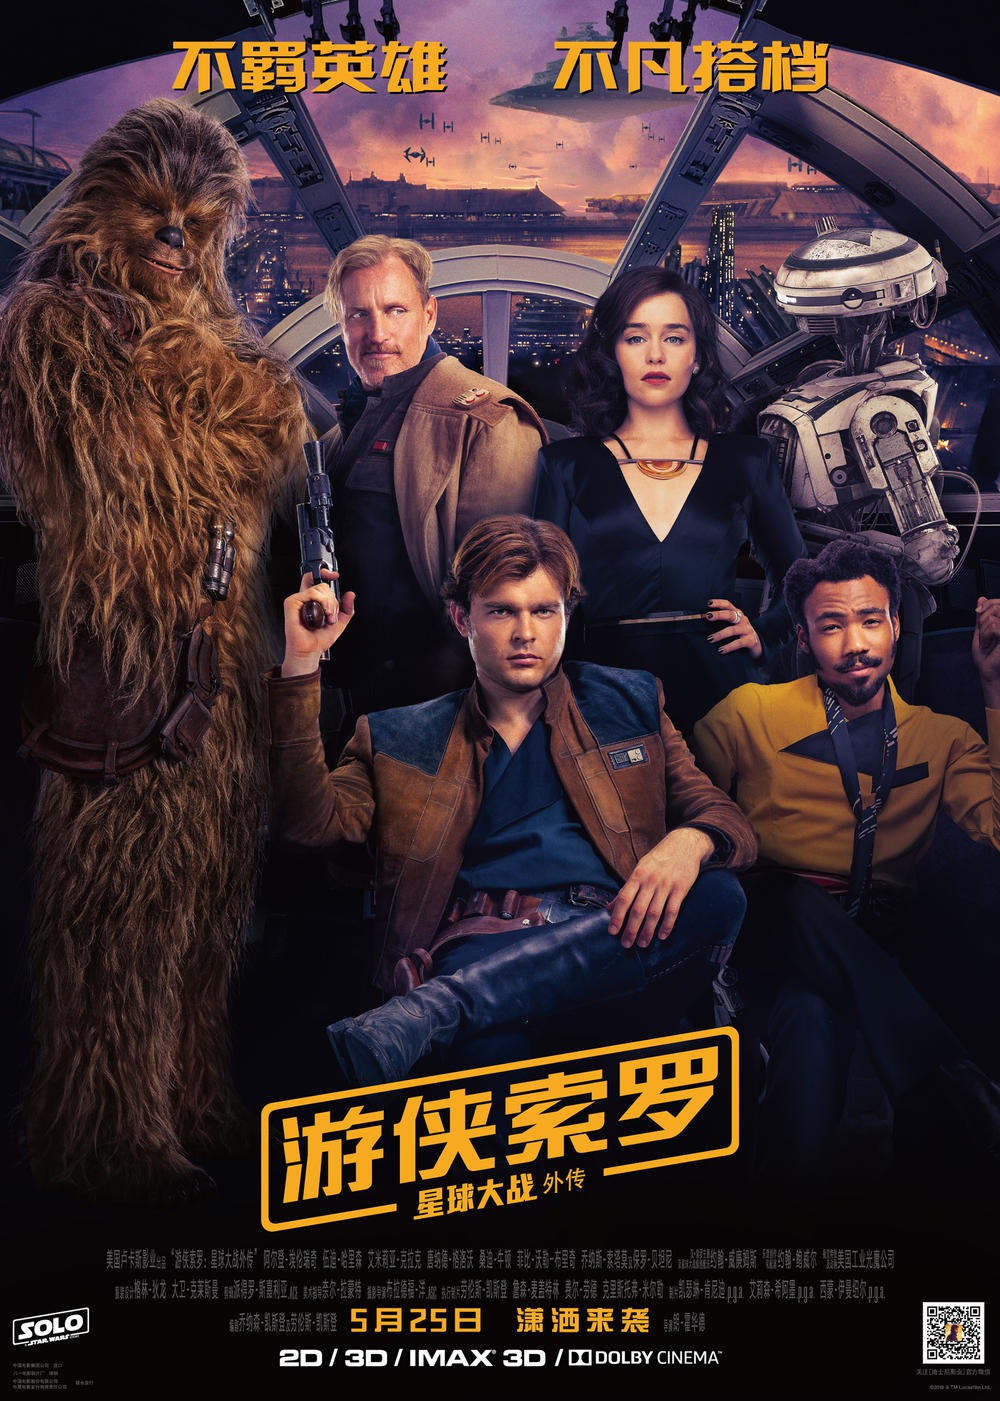 SOLO A STAR WARS STORY Poster Print Art A0 A1 A2 A3 MOVIE POSTER ZZ010